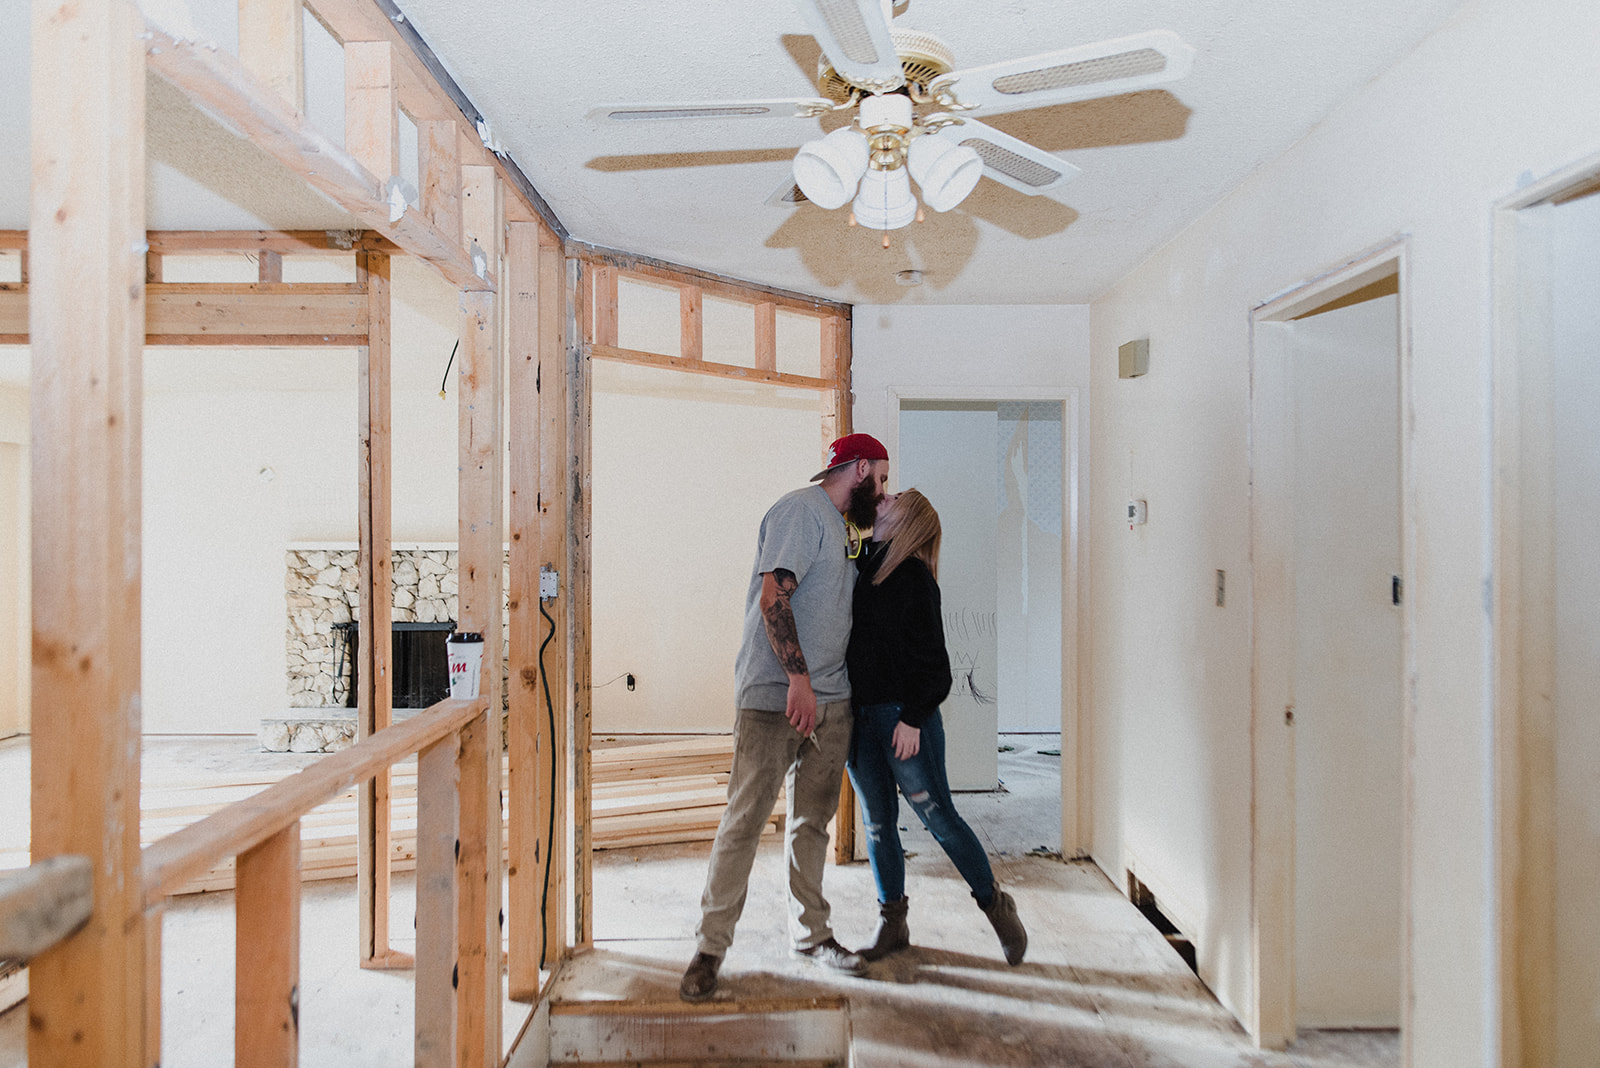 A man and woman kiss while standing in a house currently being renovated.